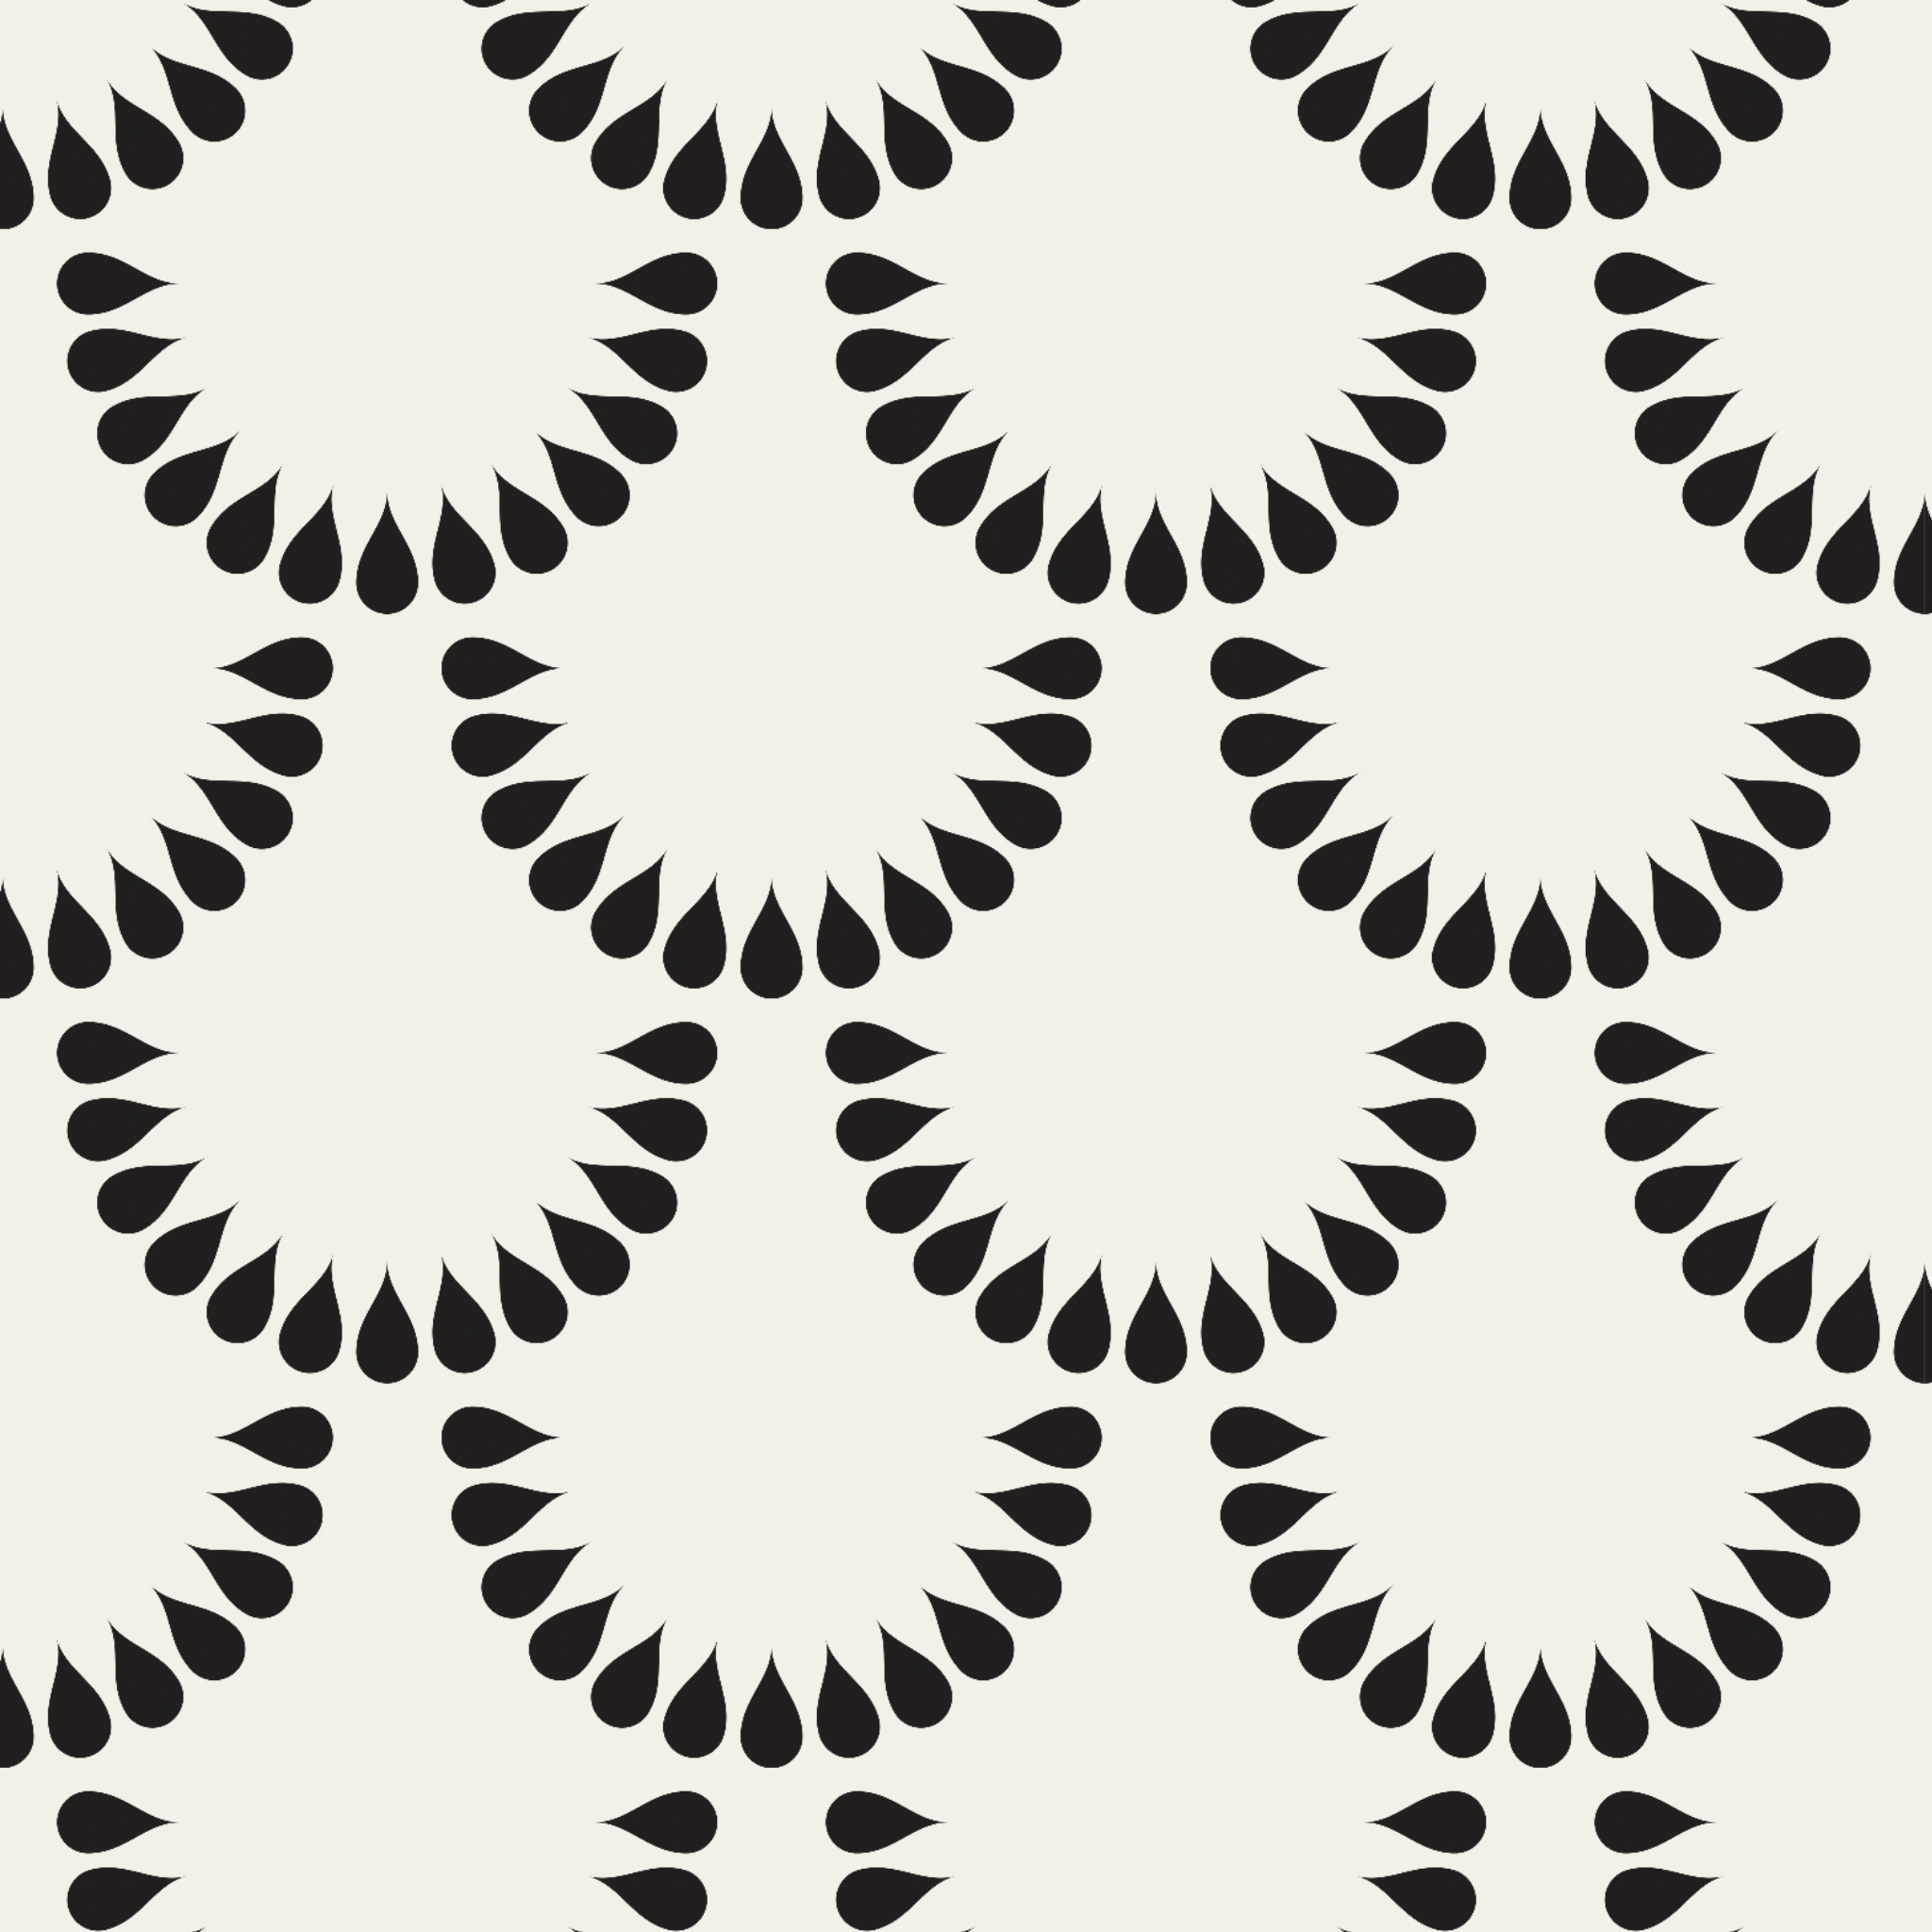 "Elegant Pearl Wallpaper by Wall Blush installed in a modern living space, enhancing room aesthetics."

(Note: Since the image is a close-up of the wallpaper pattern, I've assumed that it is installed in a room. If the type of room isn't actually visible, it would be inaccurate to specify one; an alt text should then focus on the wallpaper pattern and the brand, for example: "Wall Blush Pearl Wallpaper pattern close-up with sophisticated black and white teardrop design.")